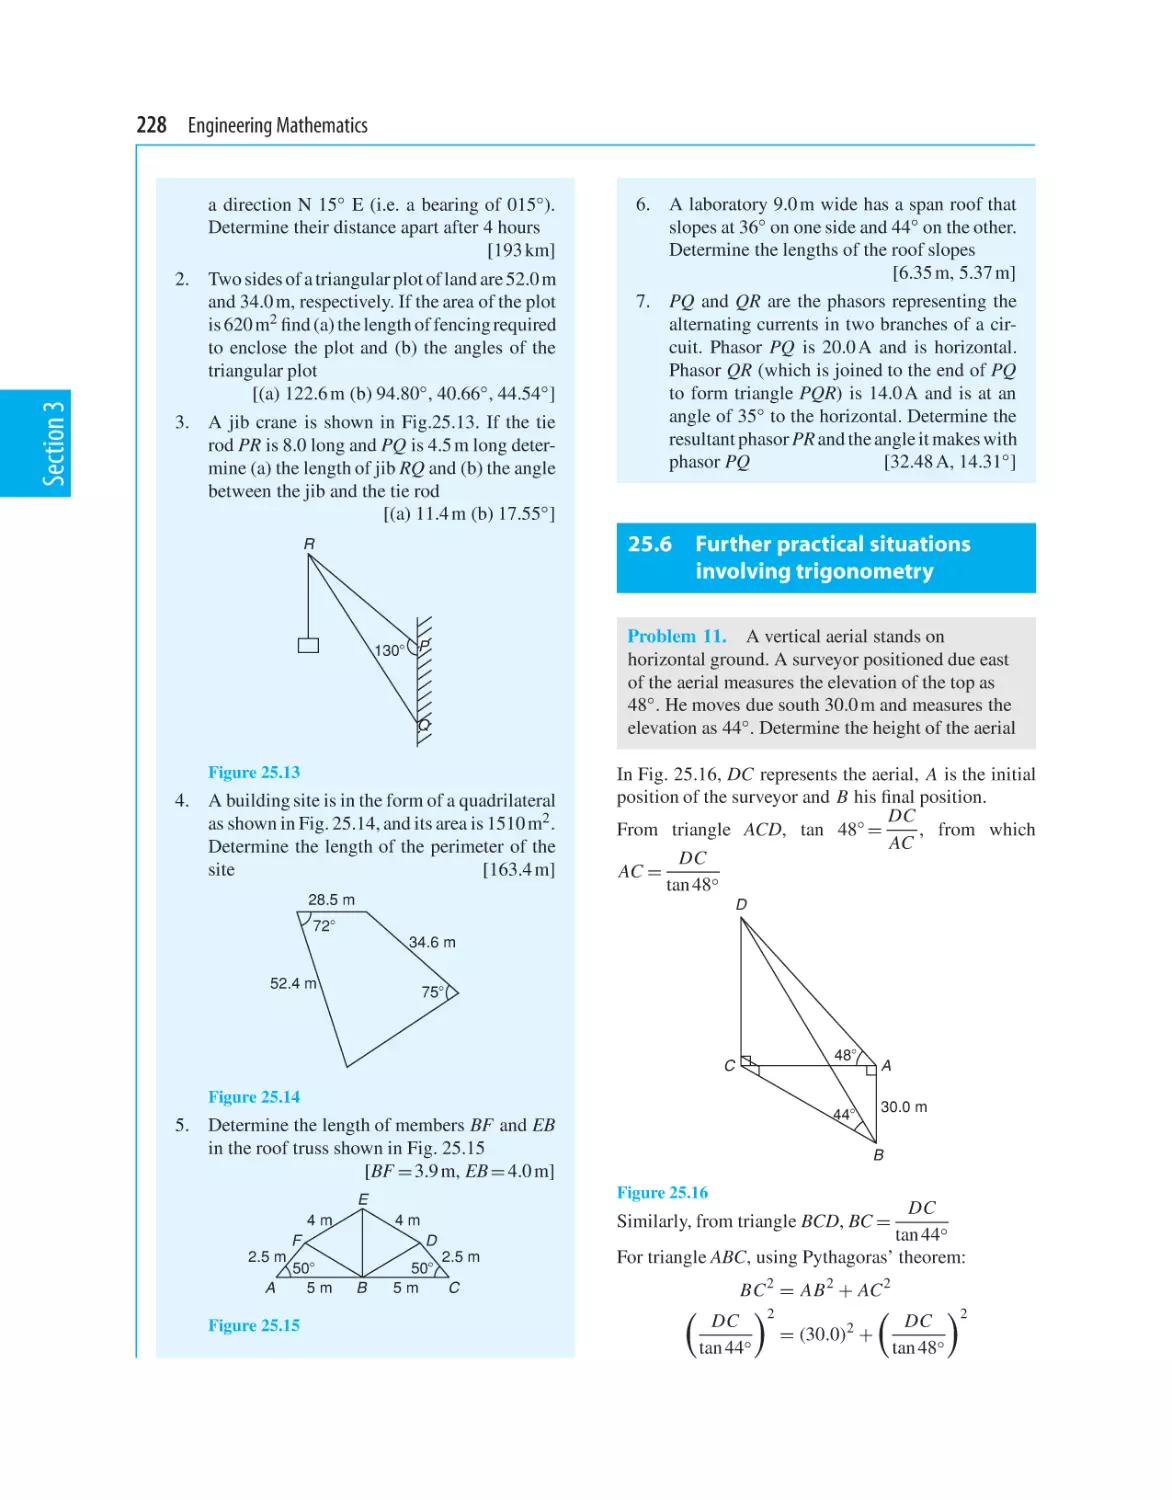 25.6 Further practical situations involving trigonometry